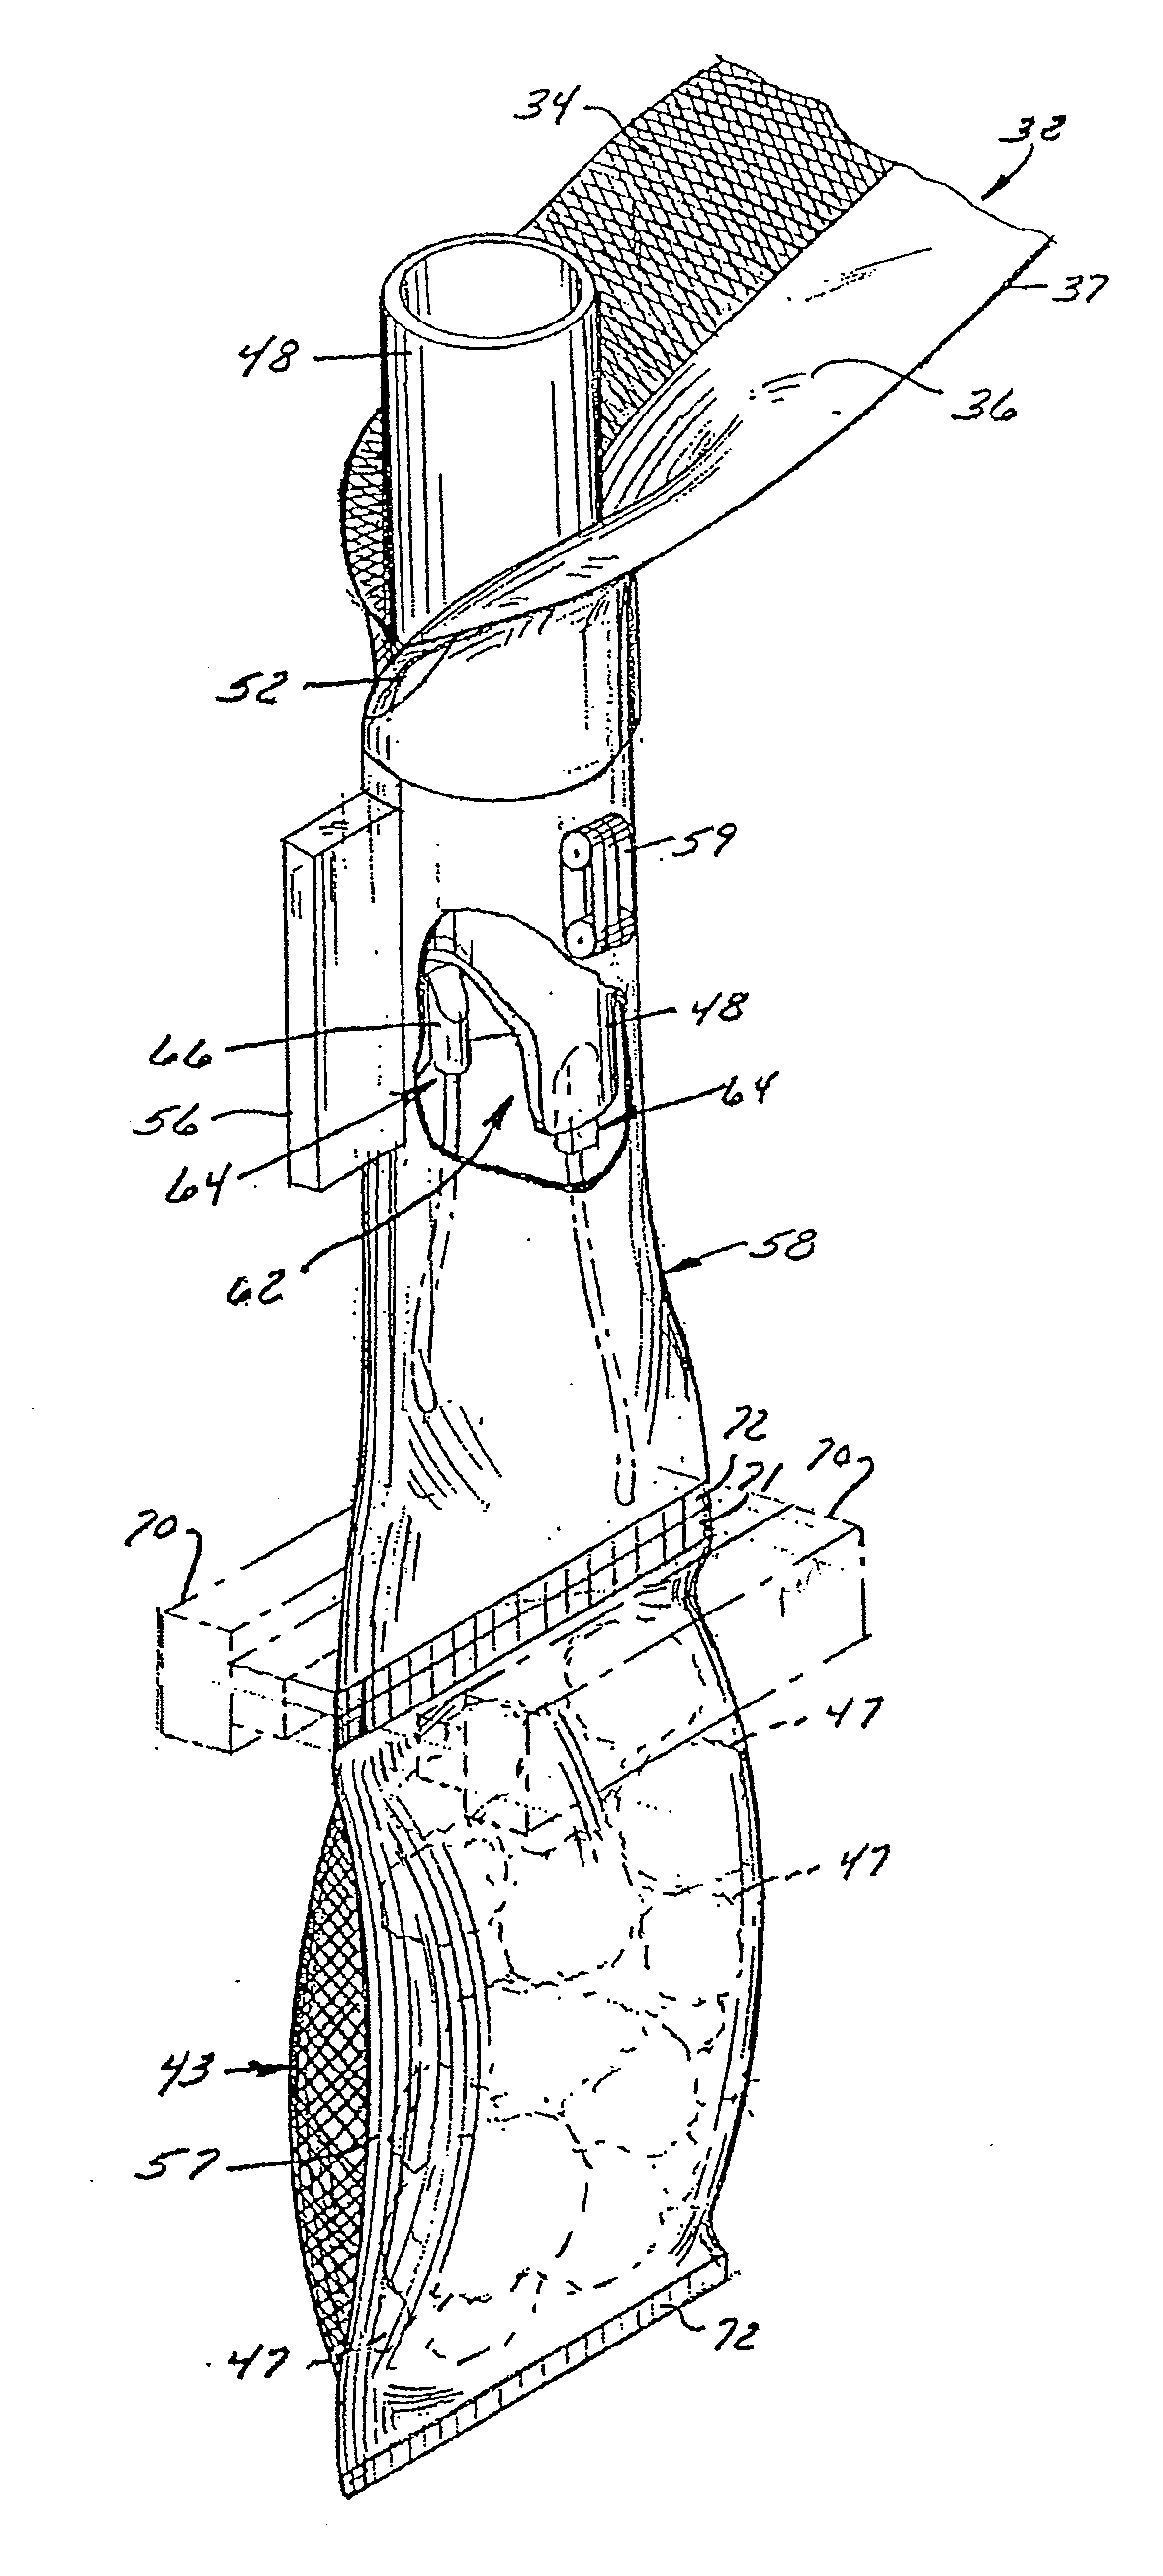 Multi-Material Vertical Form, Fill and Seal Bag Forming Method